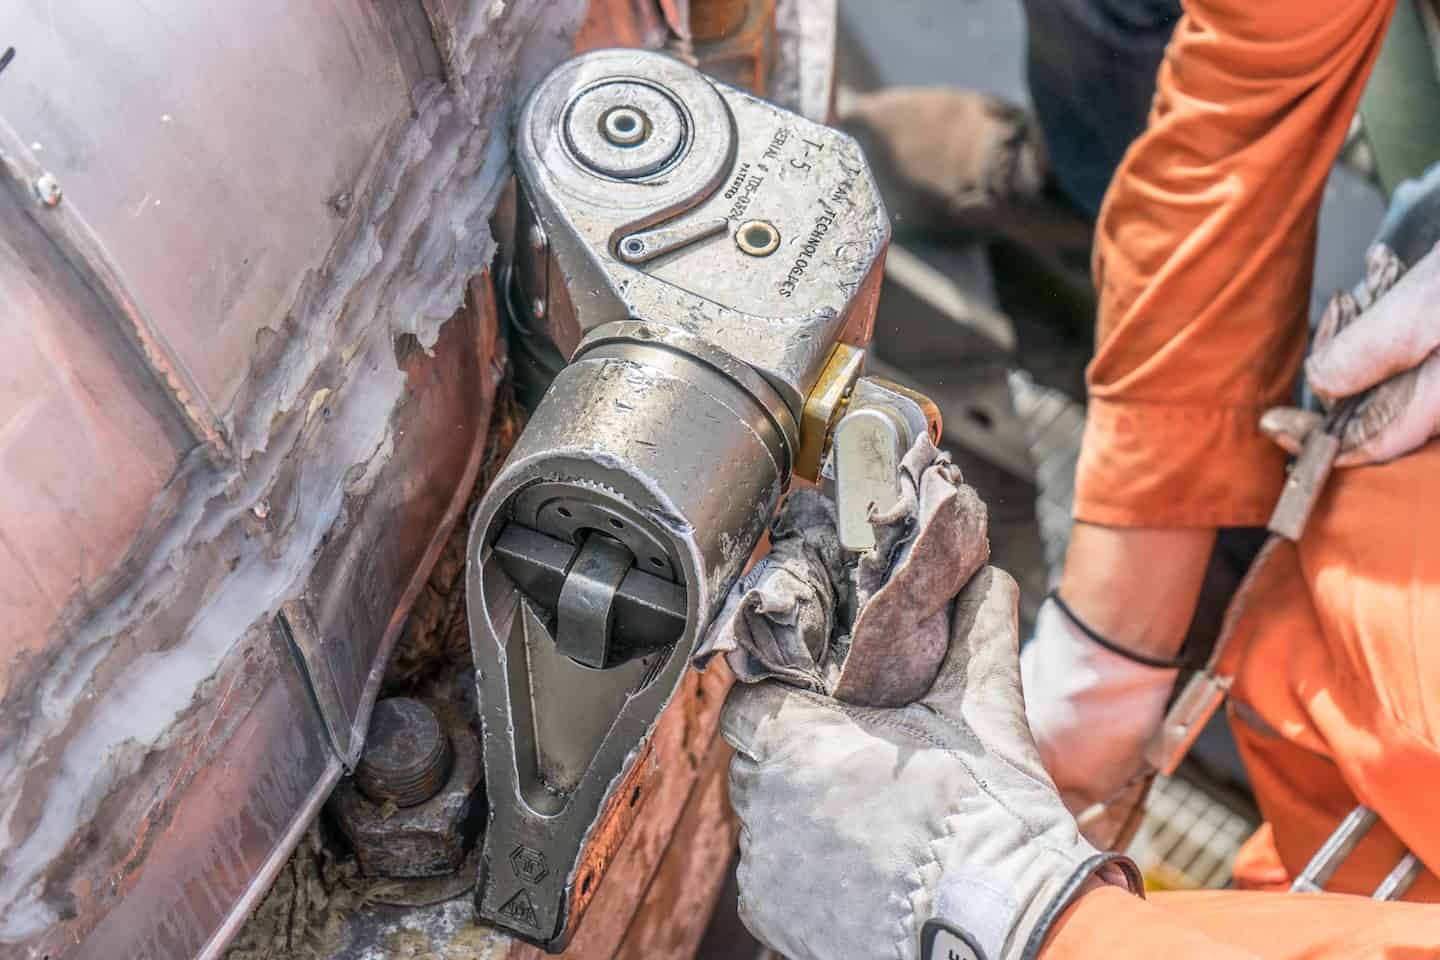 Hydraulic Torque Wrench Use in Industrial Bolting